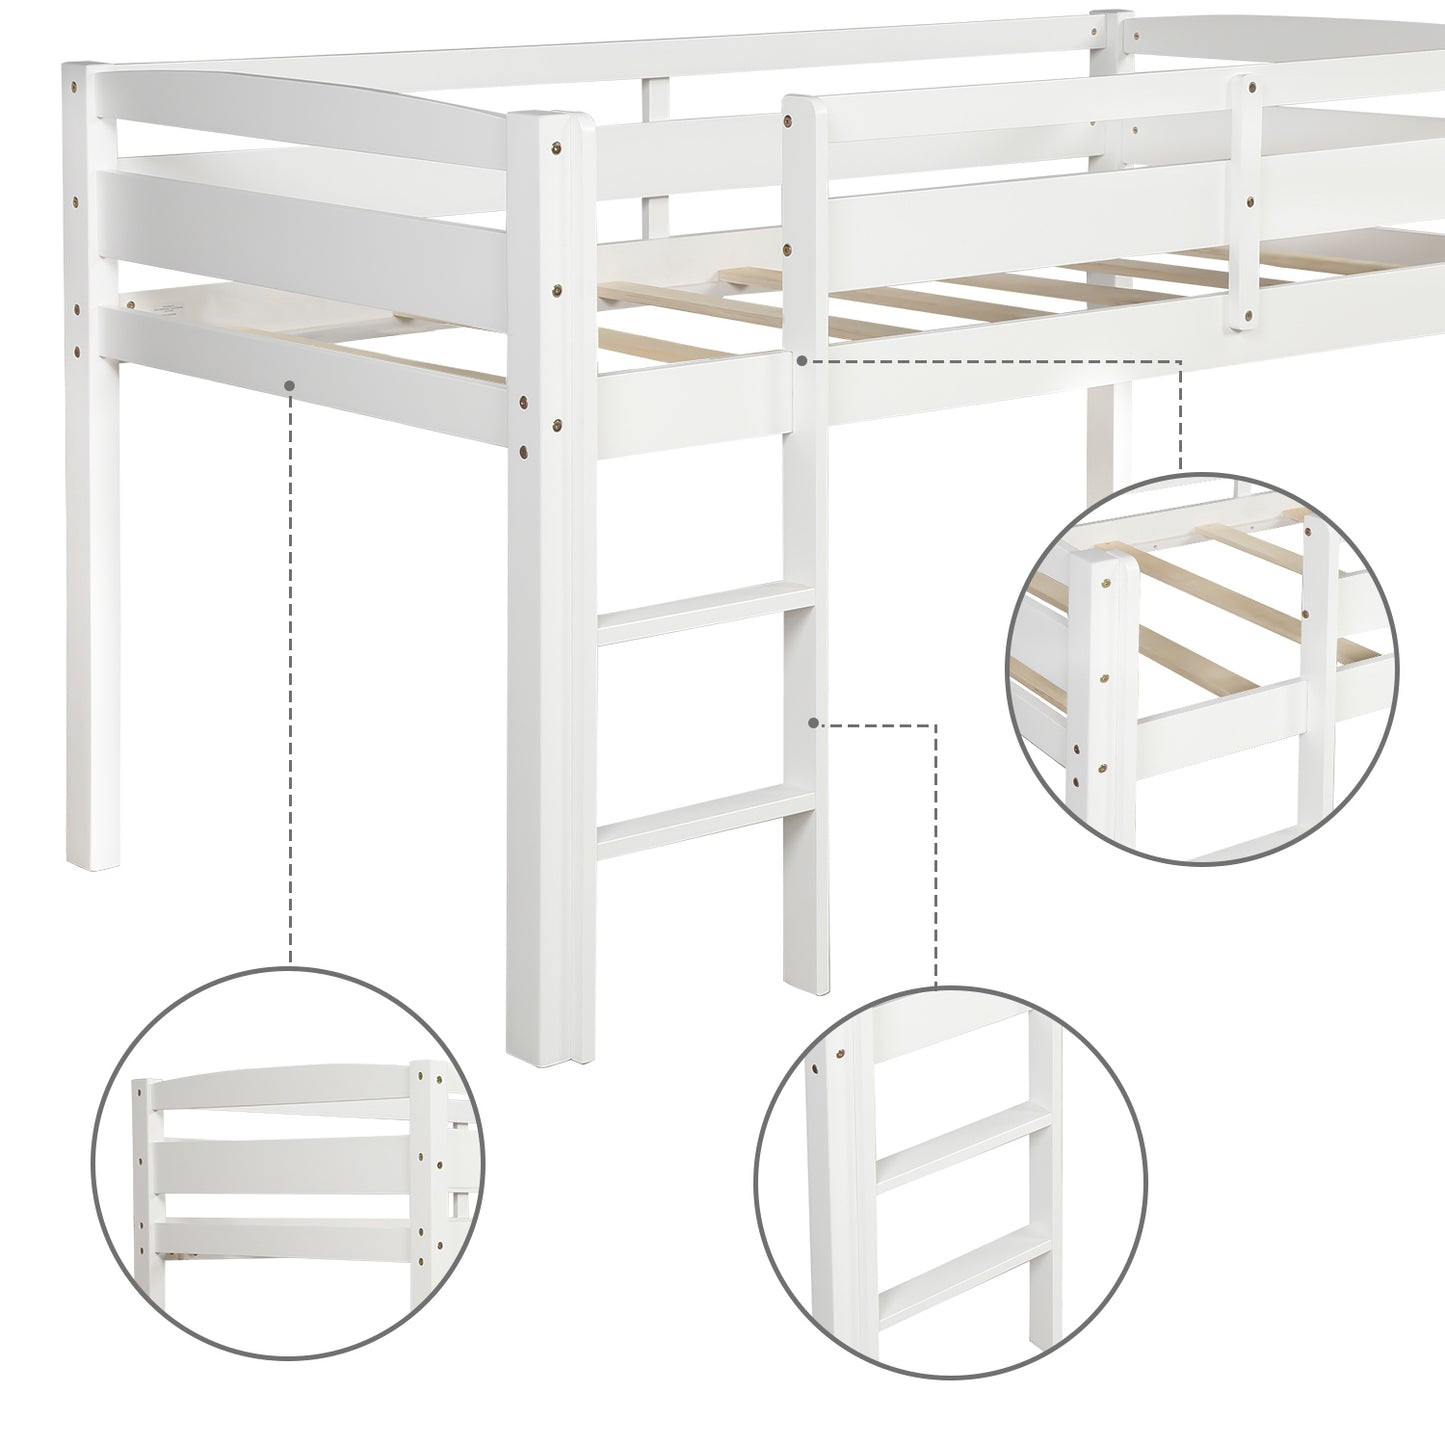 Twin Wood Loft Bed Low Loft Beds with Ladder,Twin,White